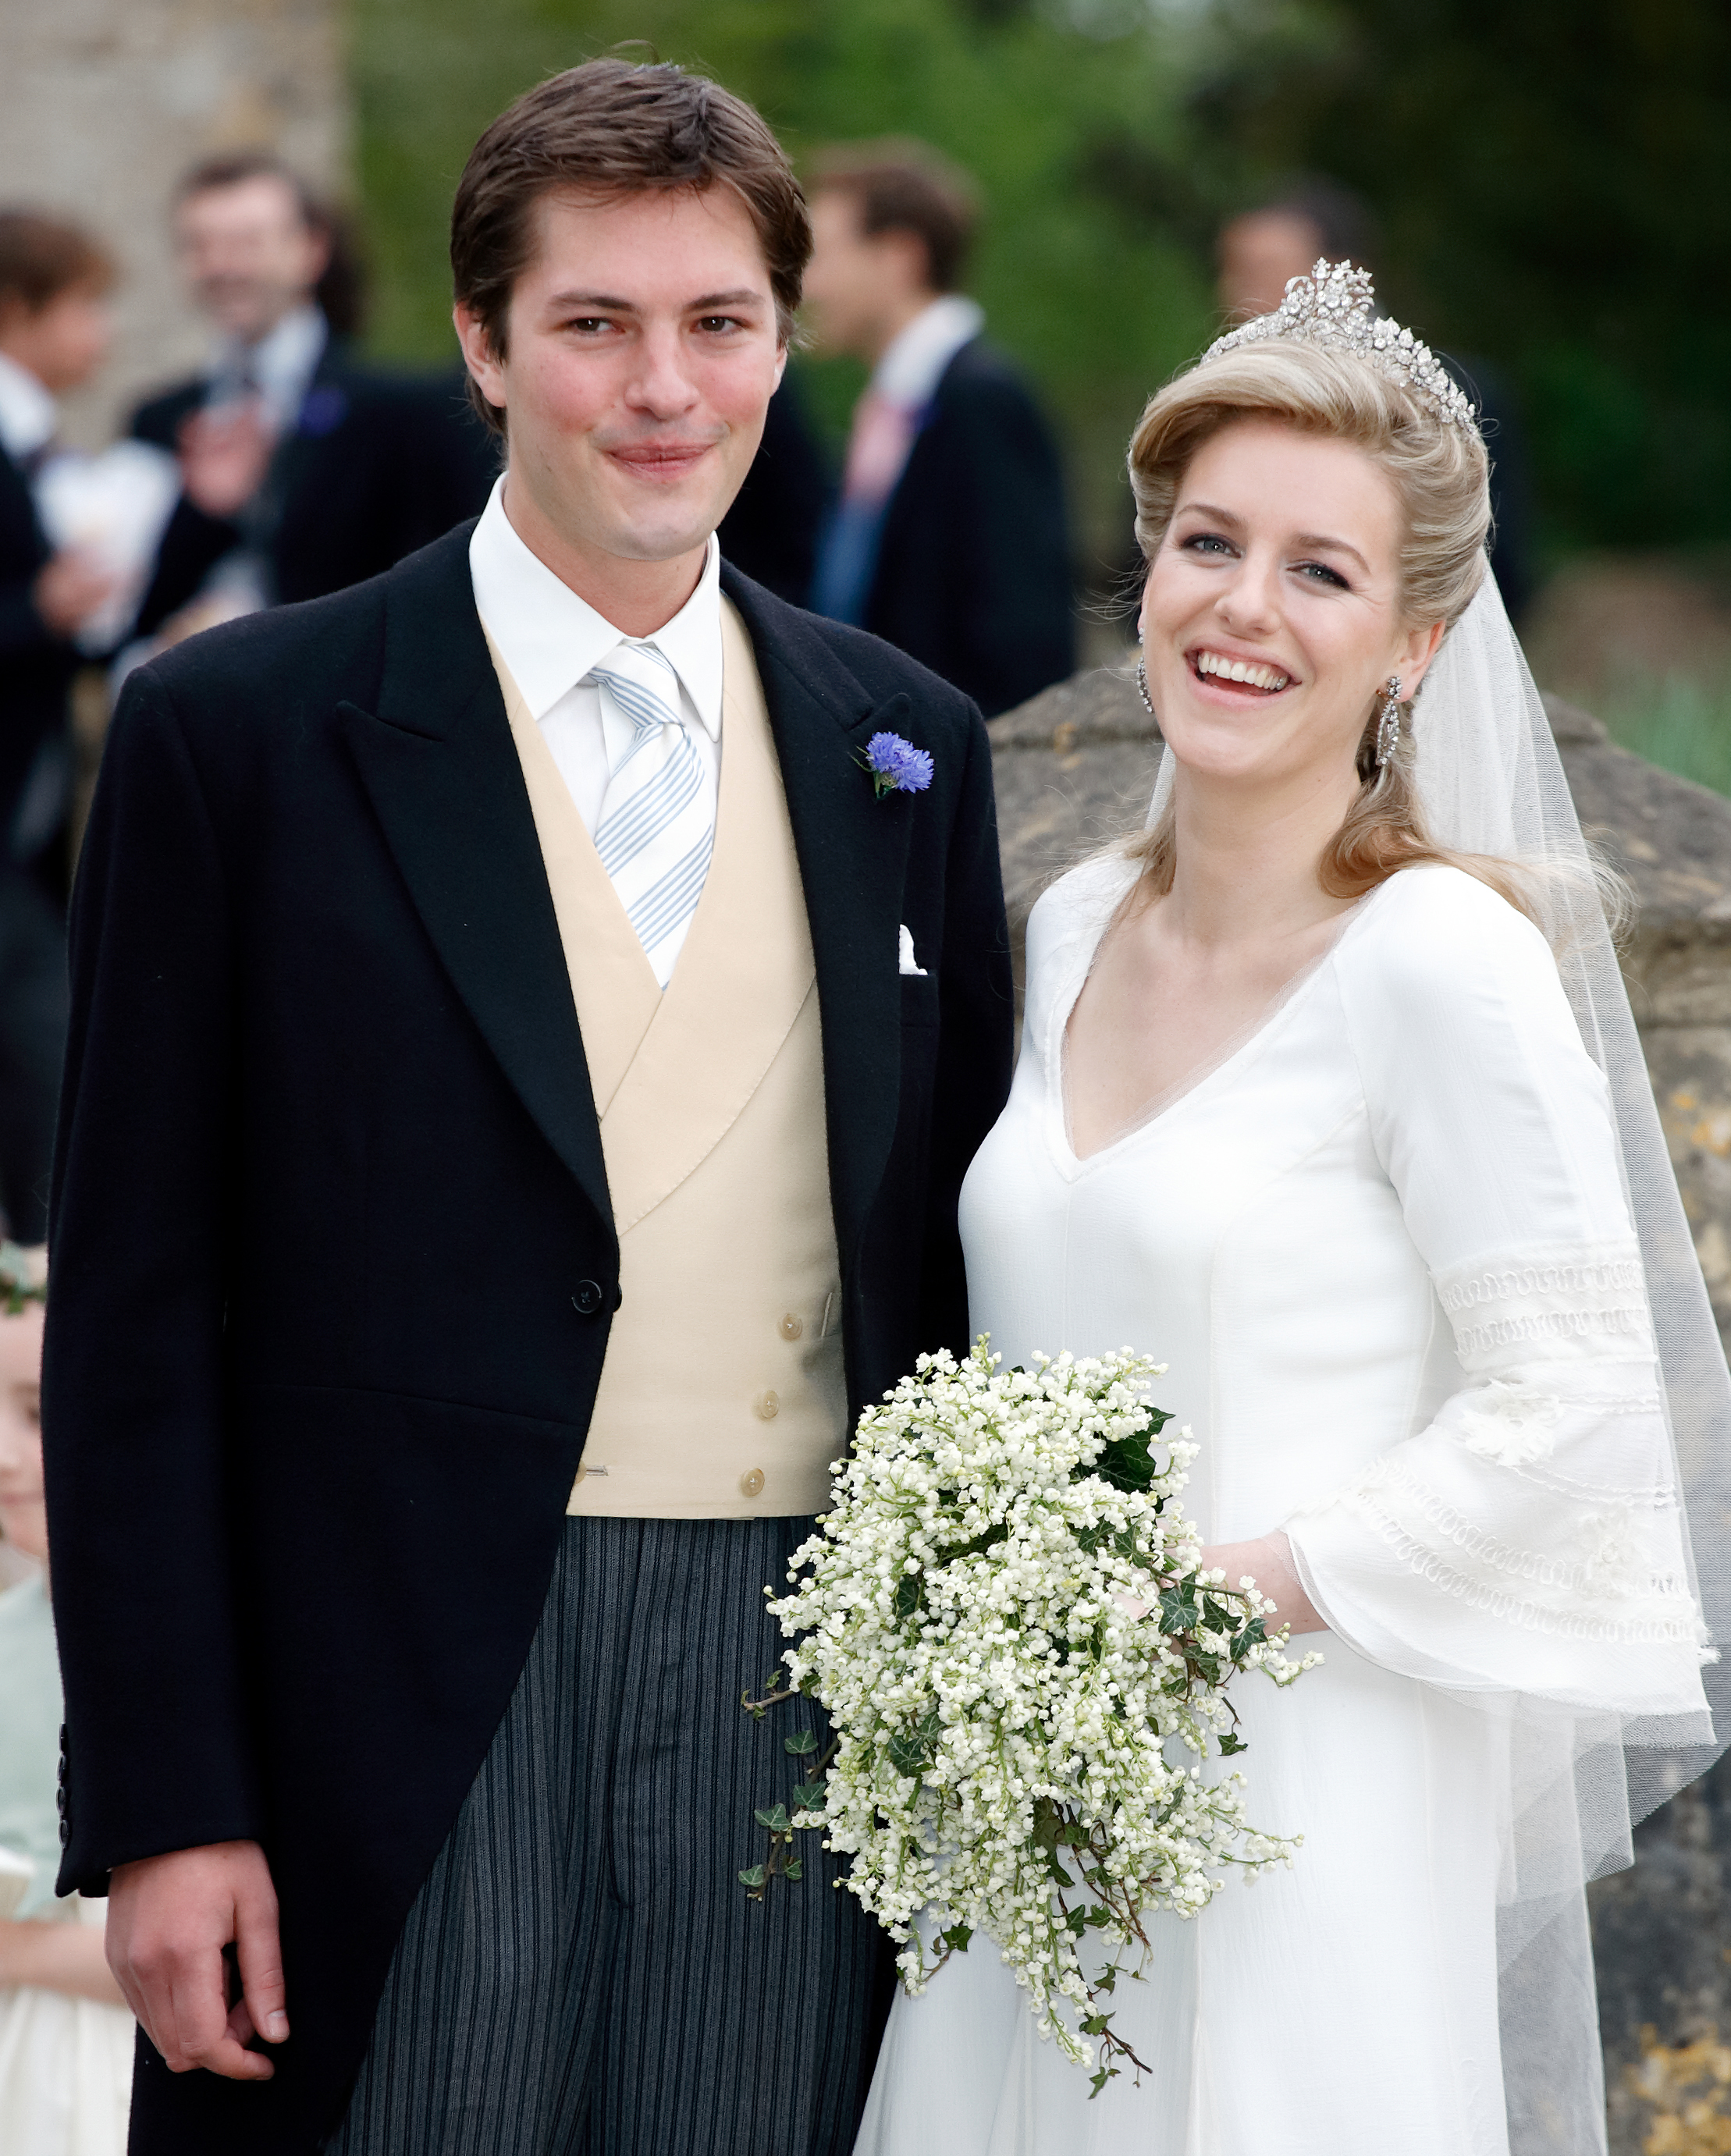 Harry Lopes and Laura Parker Bowles after their wedding at St Cyriac's Church on May 6, 2006, in Lacock, England. | Source: Getty Images